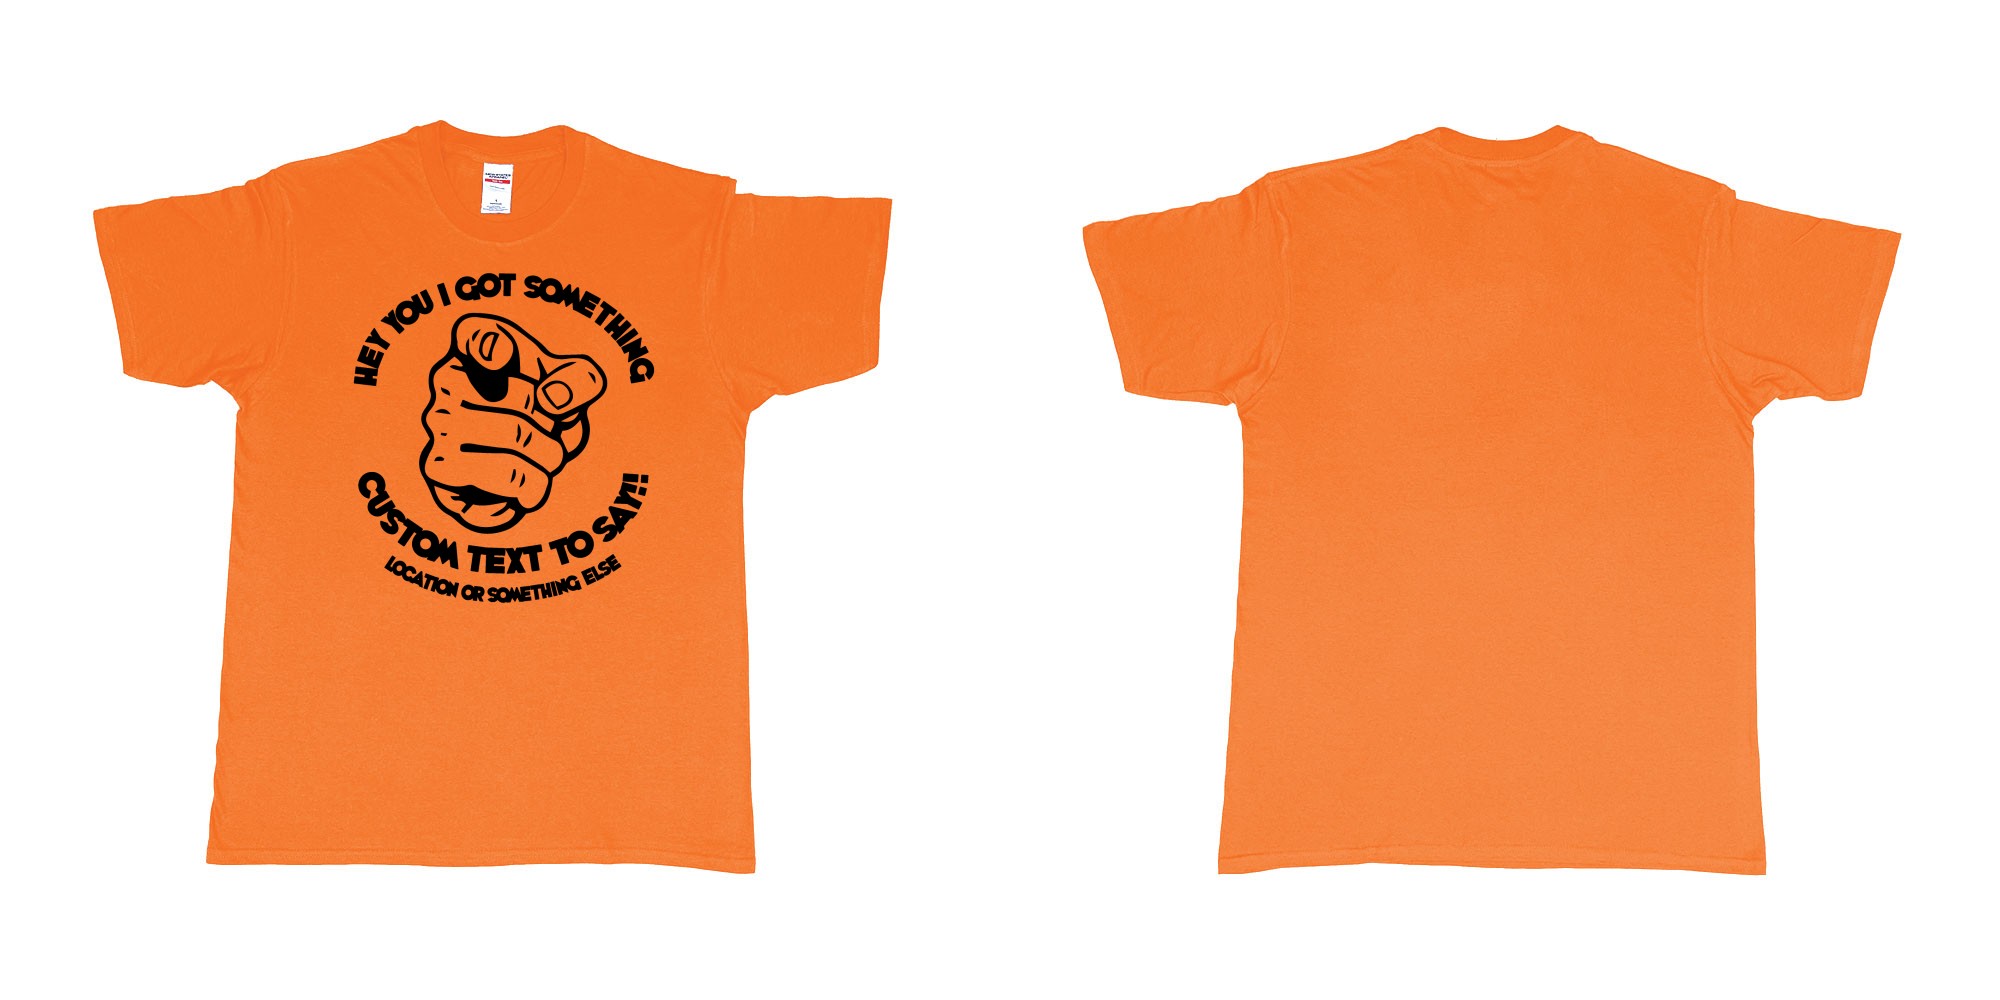 Custom tshirt design finger pointing at you with custom text to say in fabric color orange choice your own text made in Bali by The Pirate Way